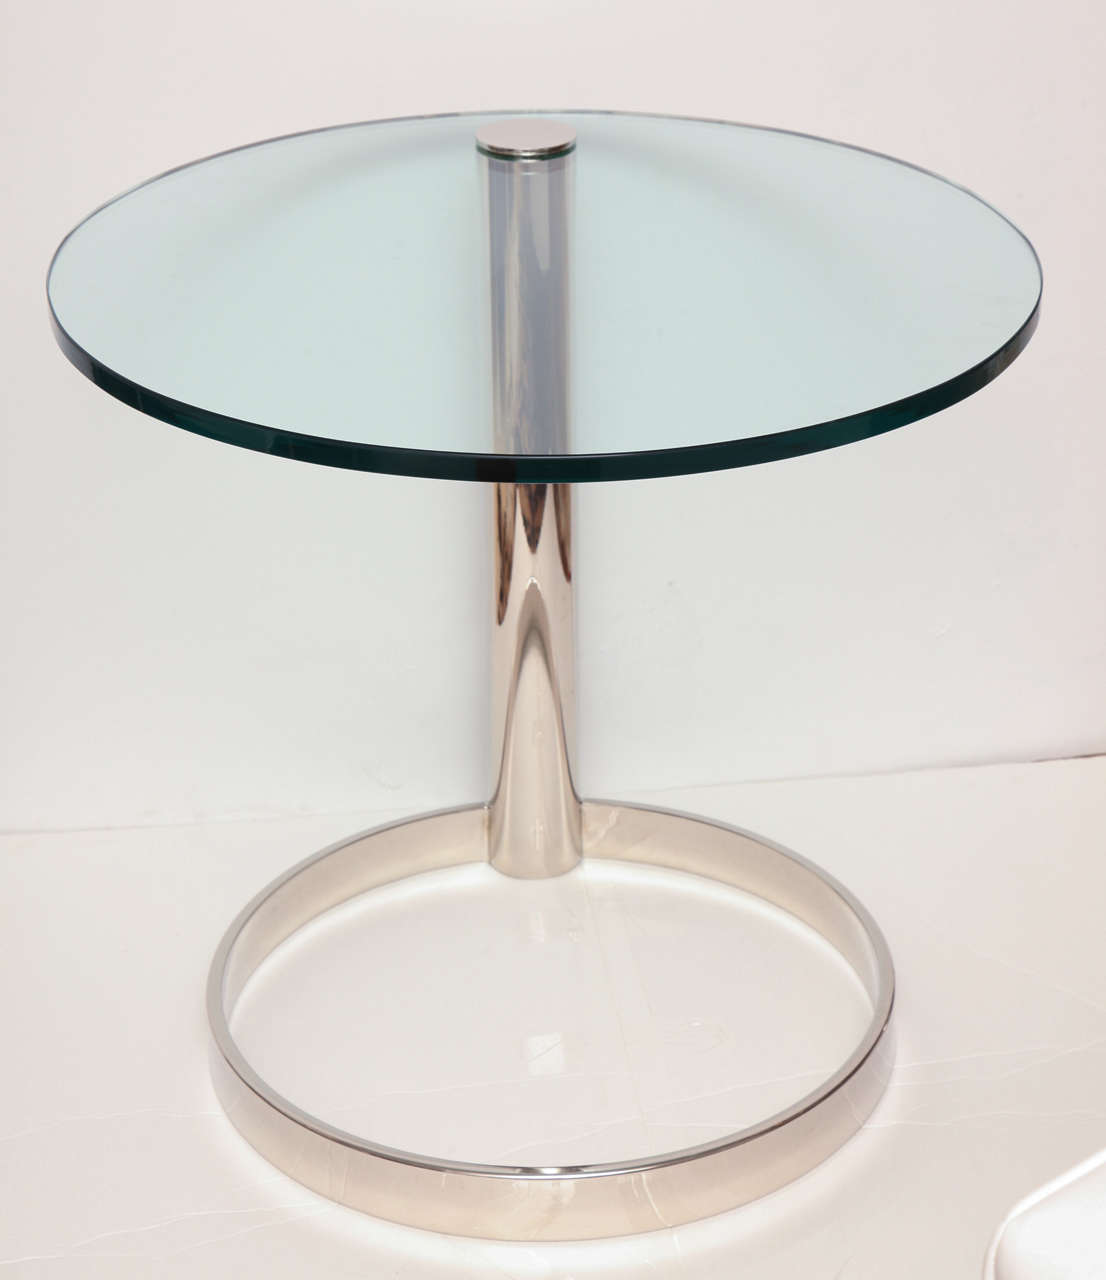 Decorative Pace table, c 1960. Nickel plated.